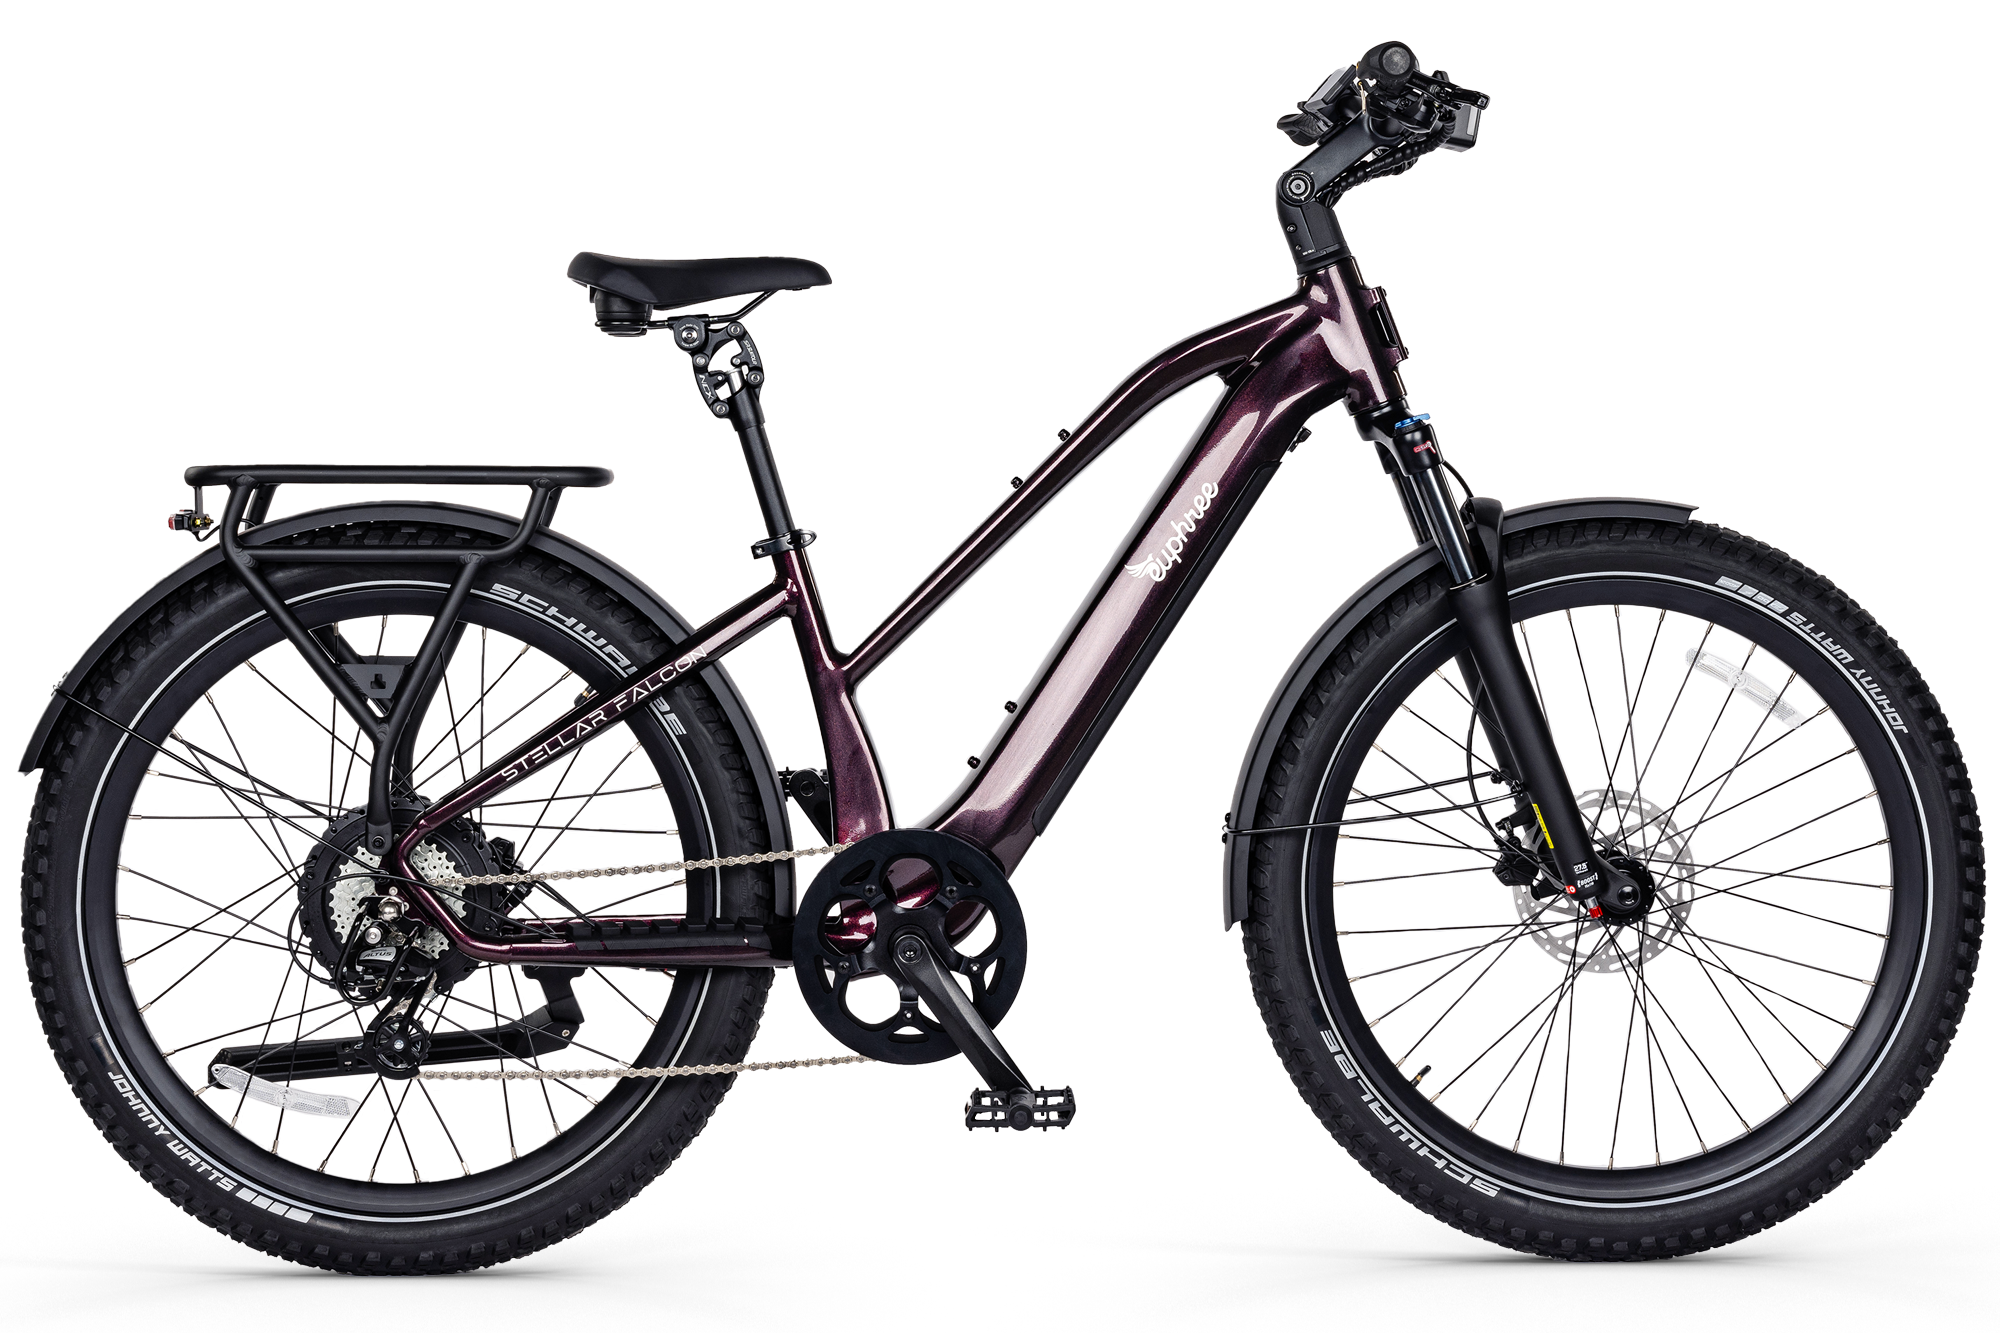 Purple Euphree Stellar Falcon electric bike featuring a mid-step frame design for easy access, equipped with wide Swabie tires for enhanced grip and comfort.